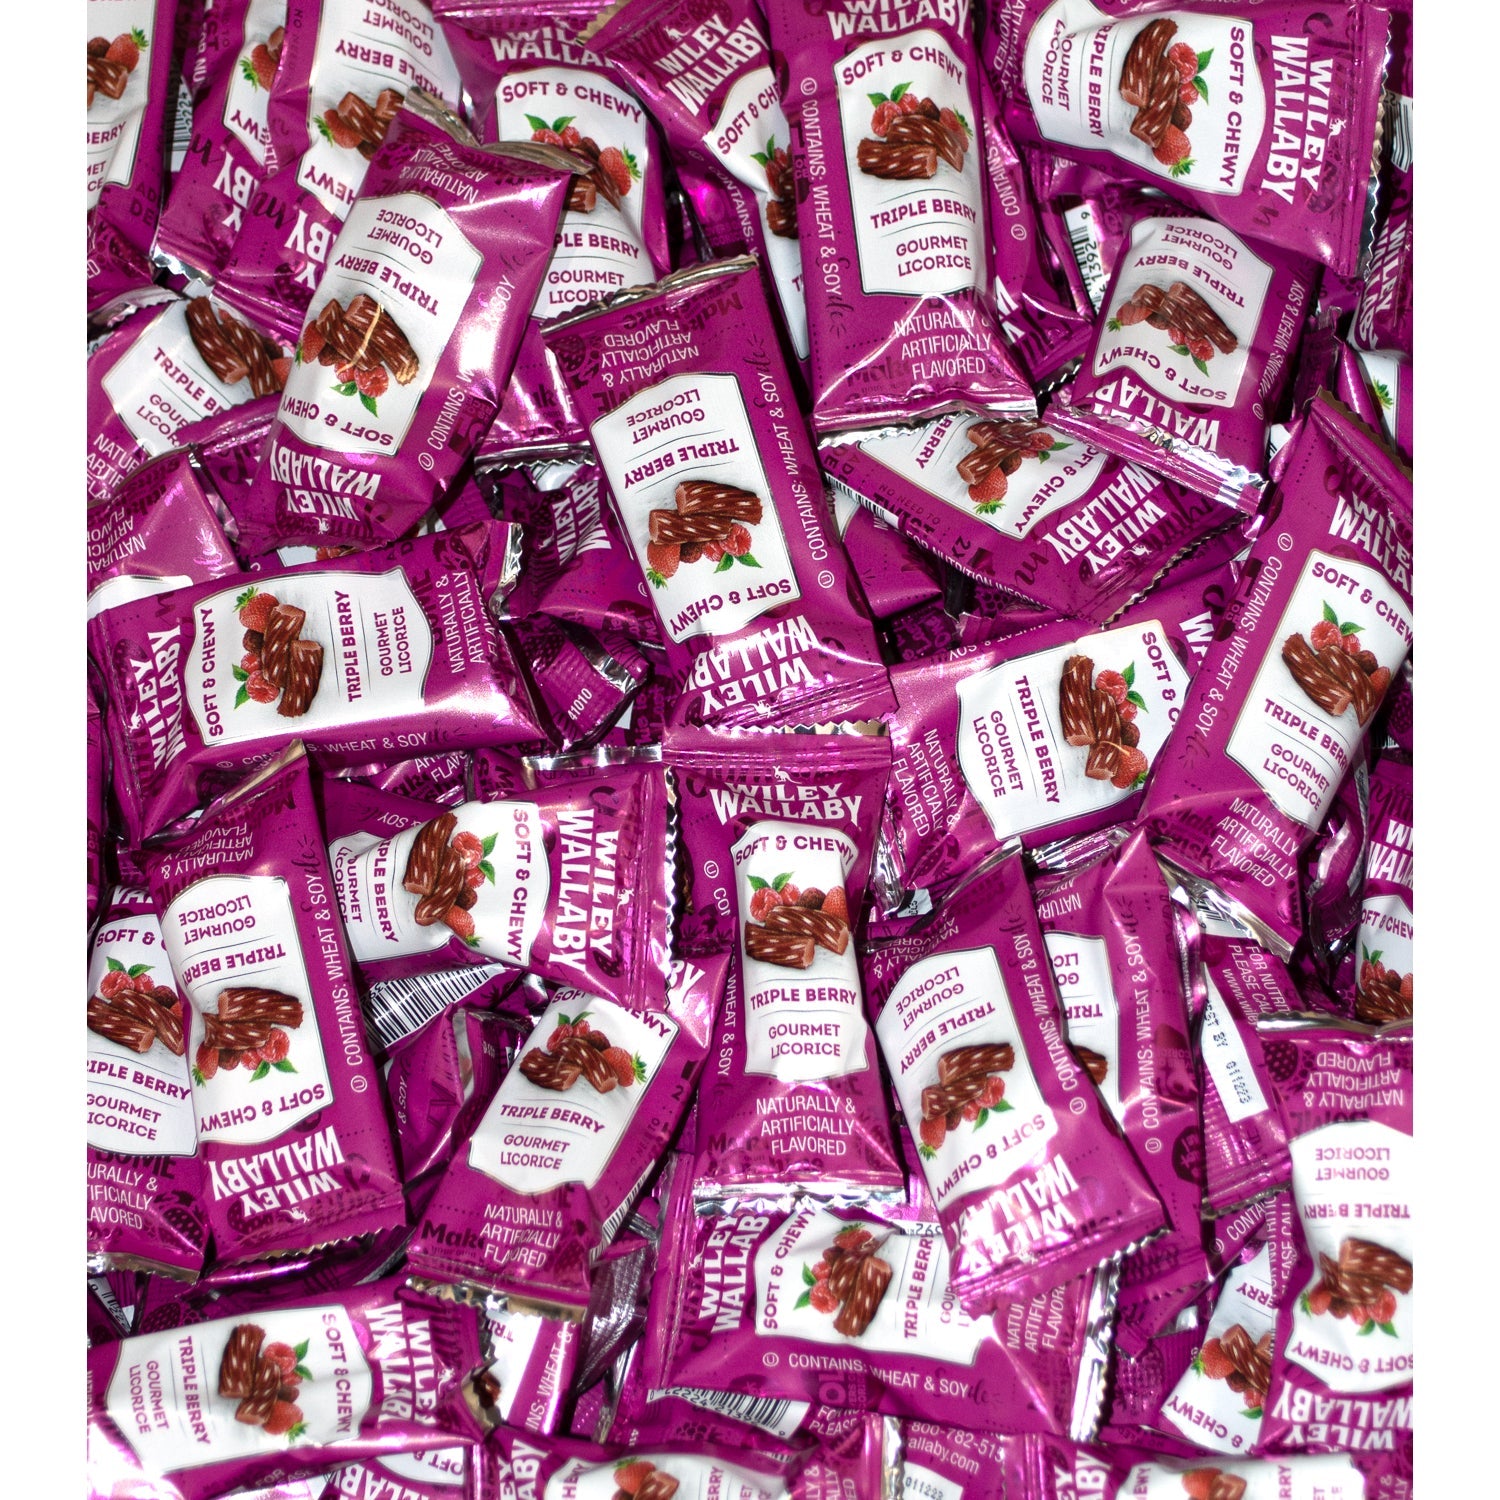 Wiley Wallaby Licorice Wiley Wallaby Triple Berry 0.28 Oz-250 Count Bite Size 